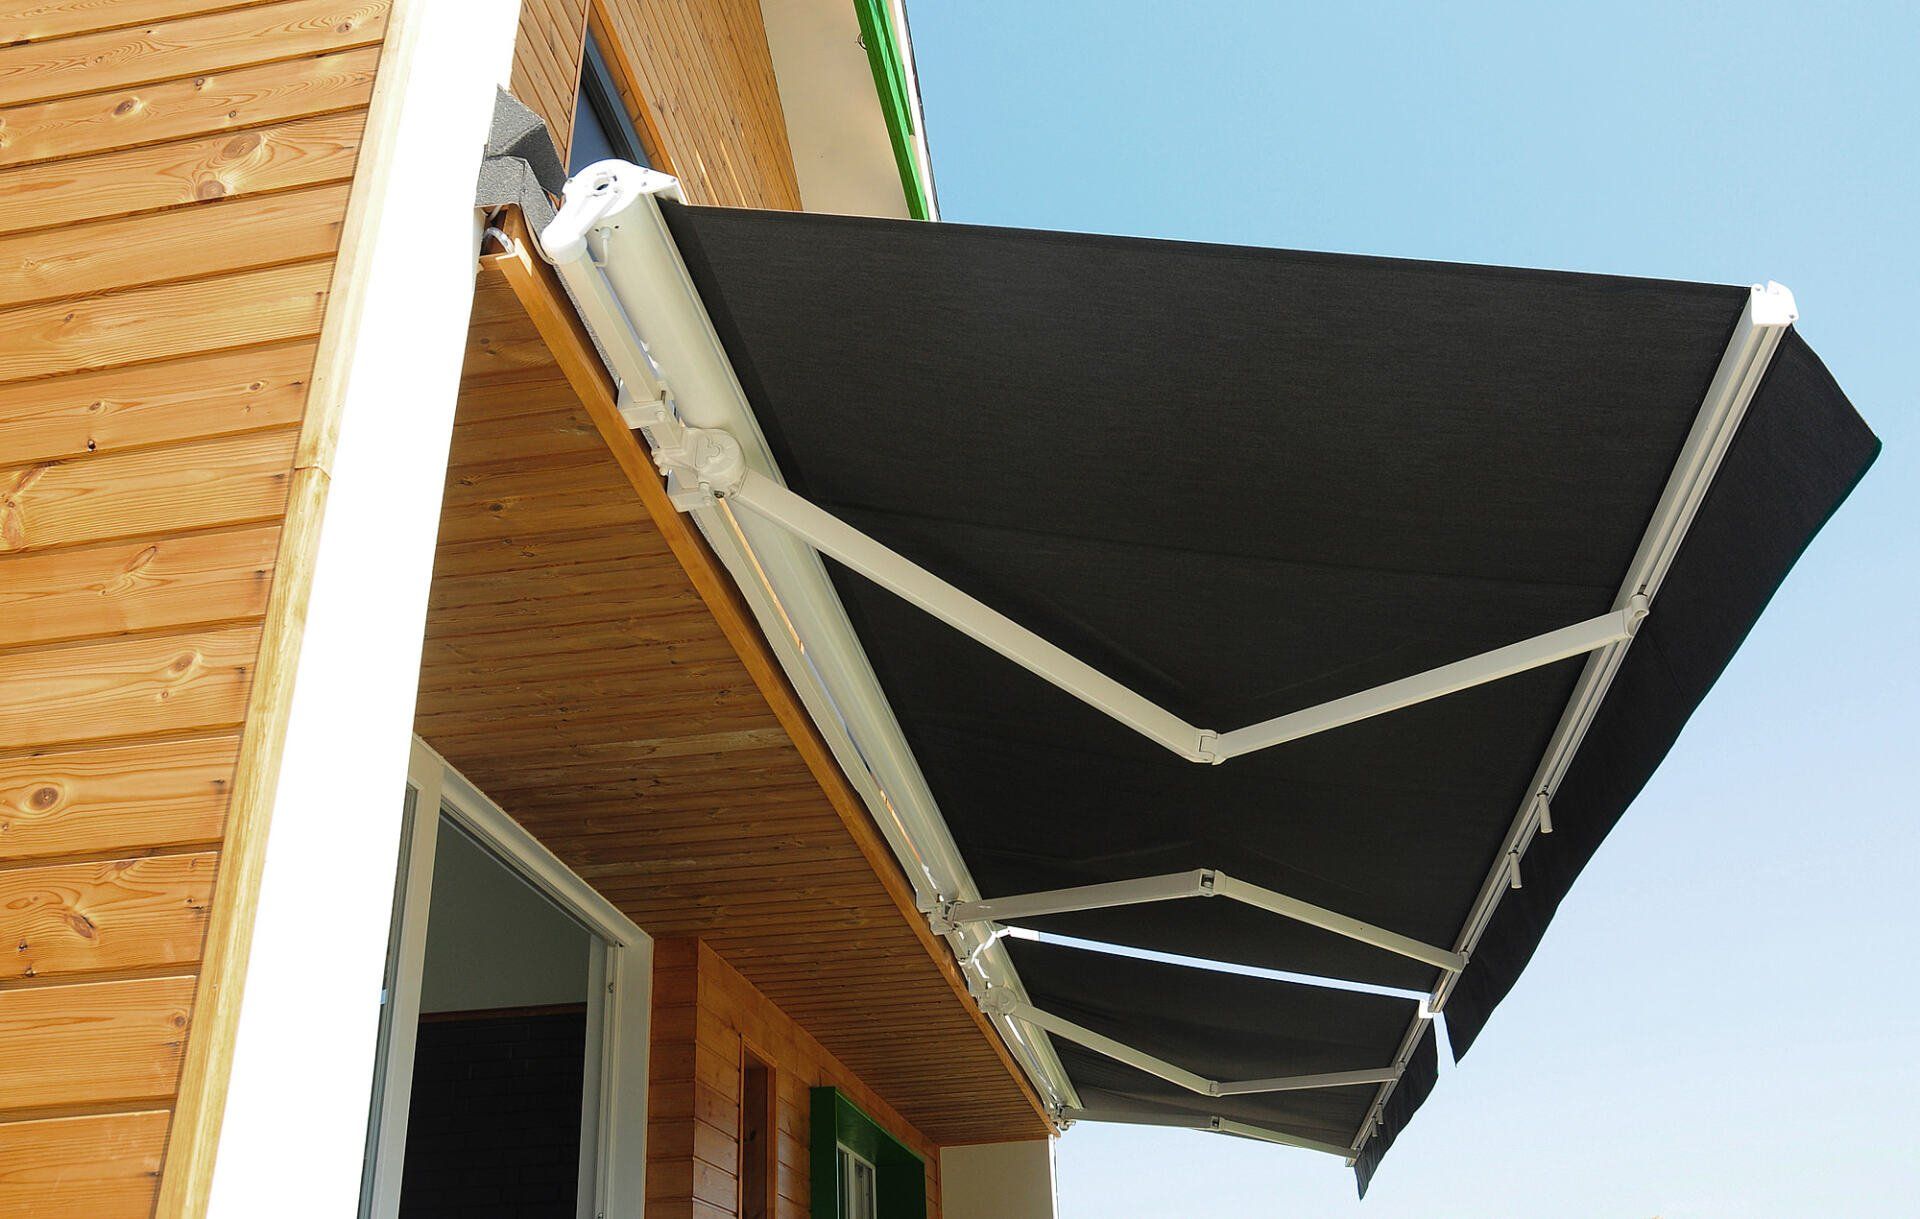 Factors To Consider When Designing Awnings